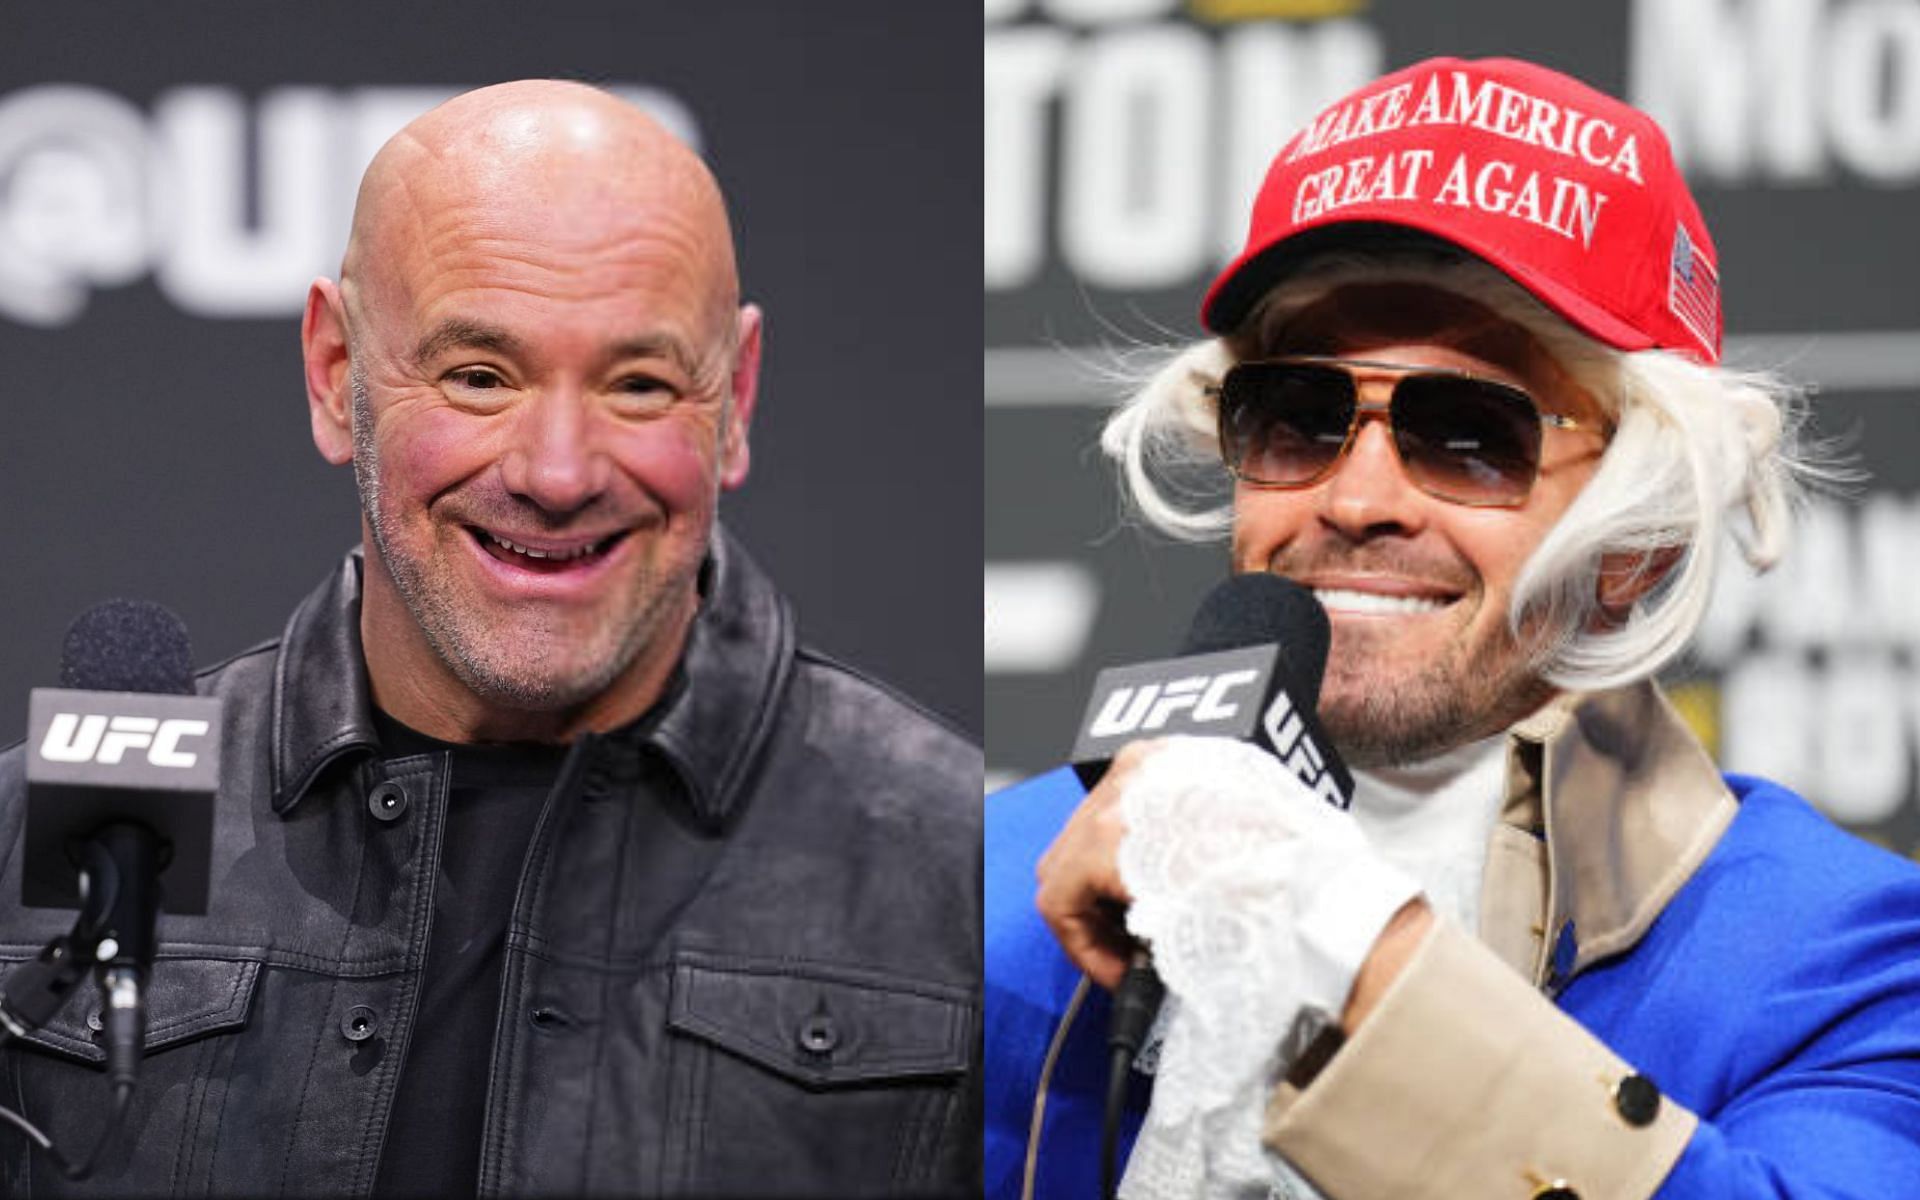 UFC president Dana White (left) and promotion under scrutiny after Colby Covington